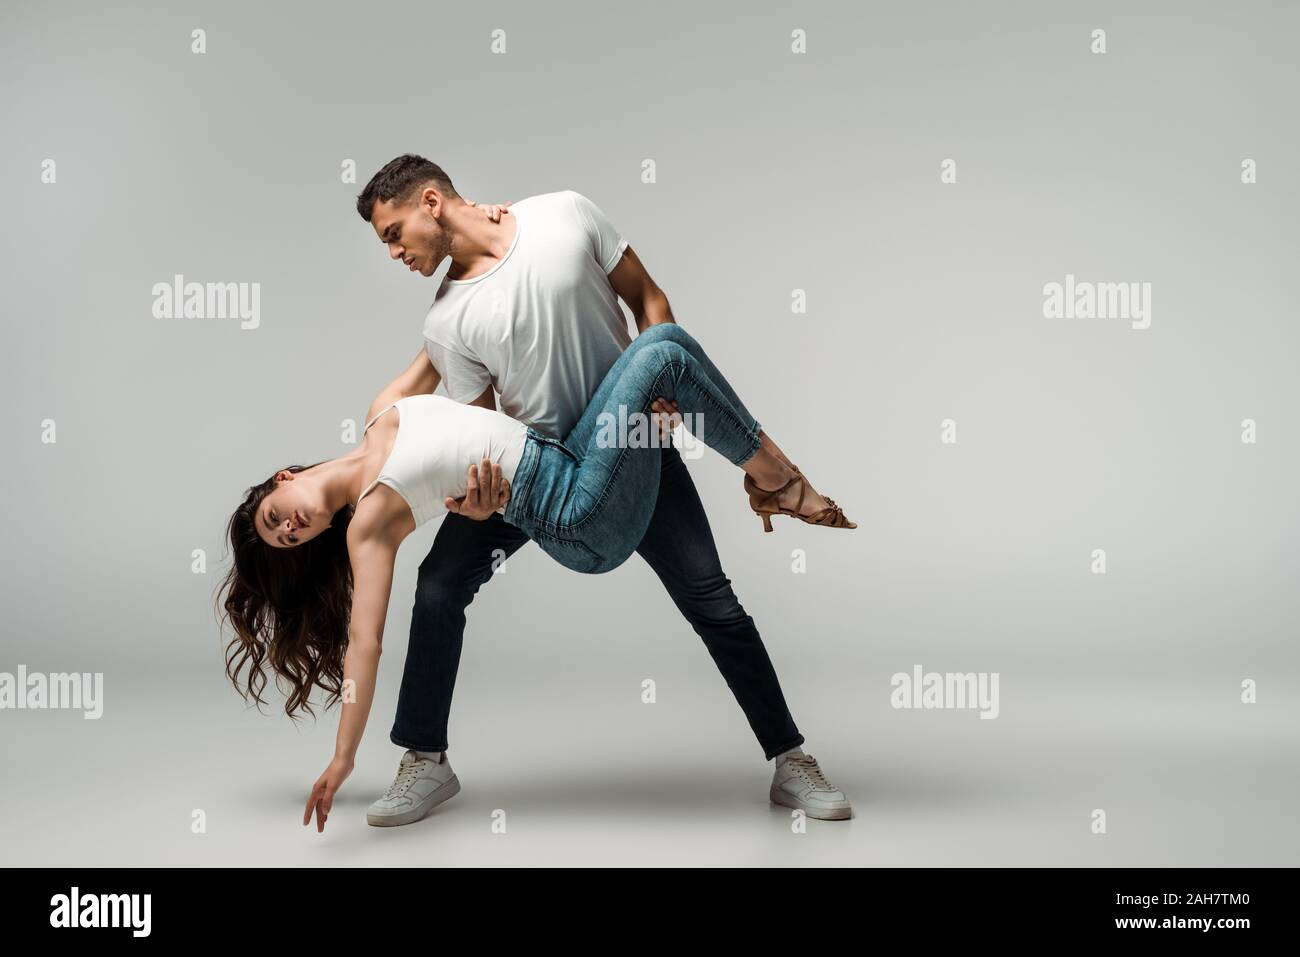 dancers in denim jeans dancing bachata on grey background Stock Photo -  Alamy